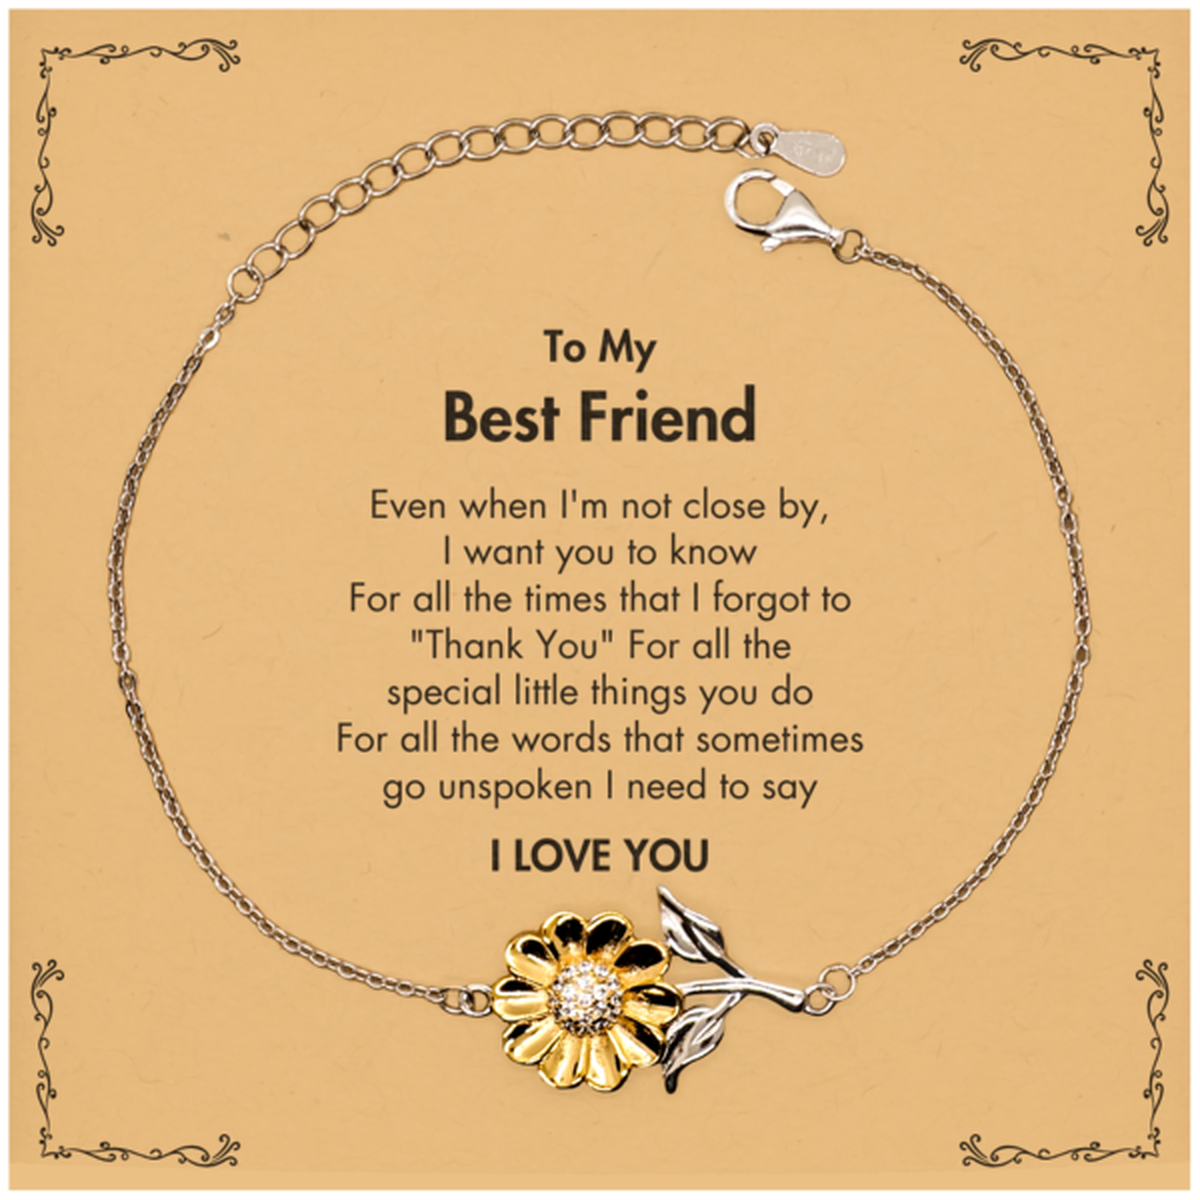 Thank You Gifts for Best Friend, Keepsake Sunflower Bracelet Gifts for Best Friend Birthday Mother's day Father's Day Best Friend For all the words That sometimes go unspoken I need to say I LOVE YOU